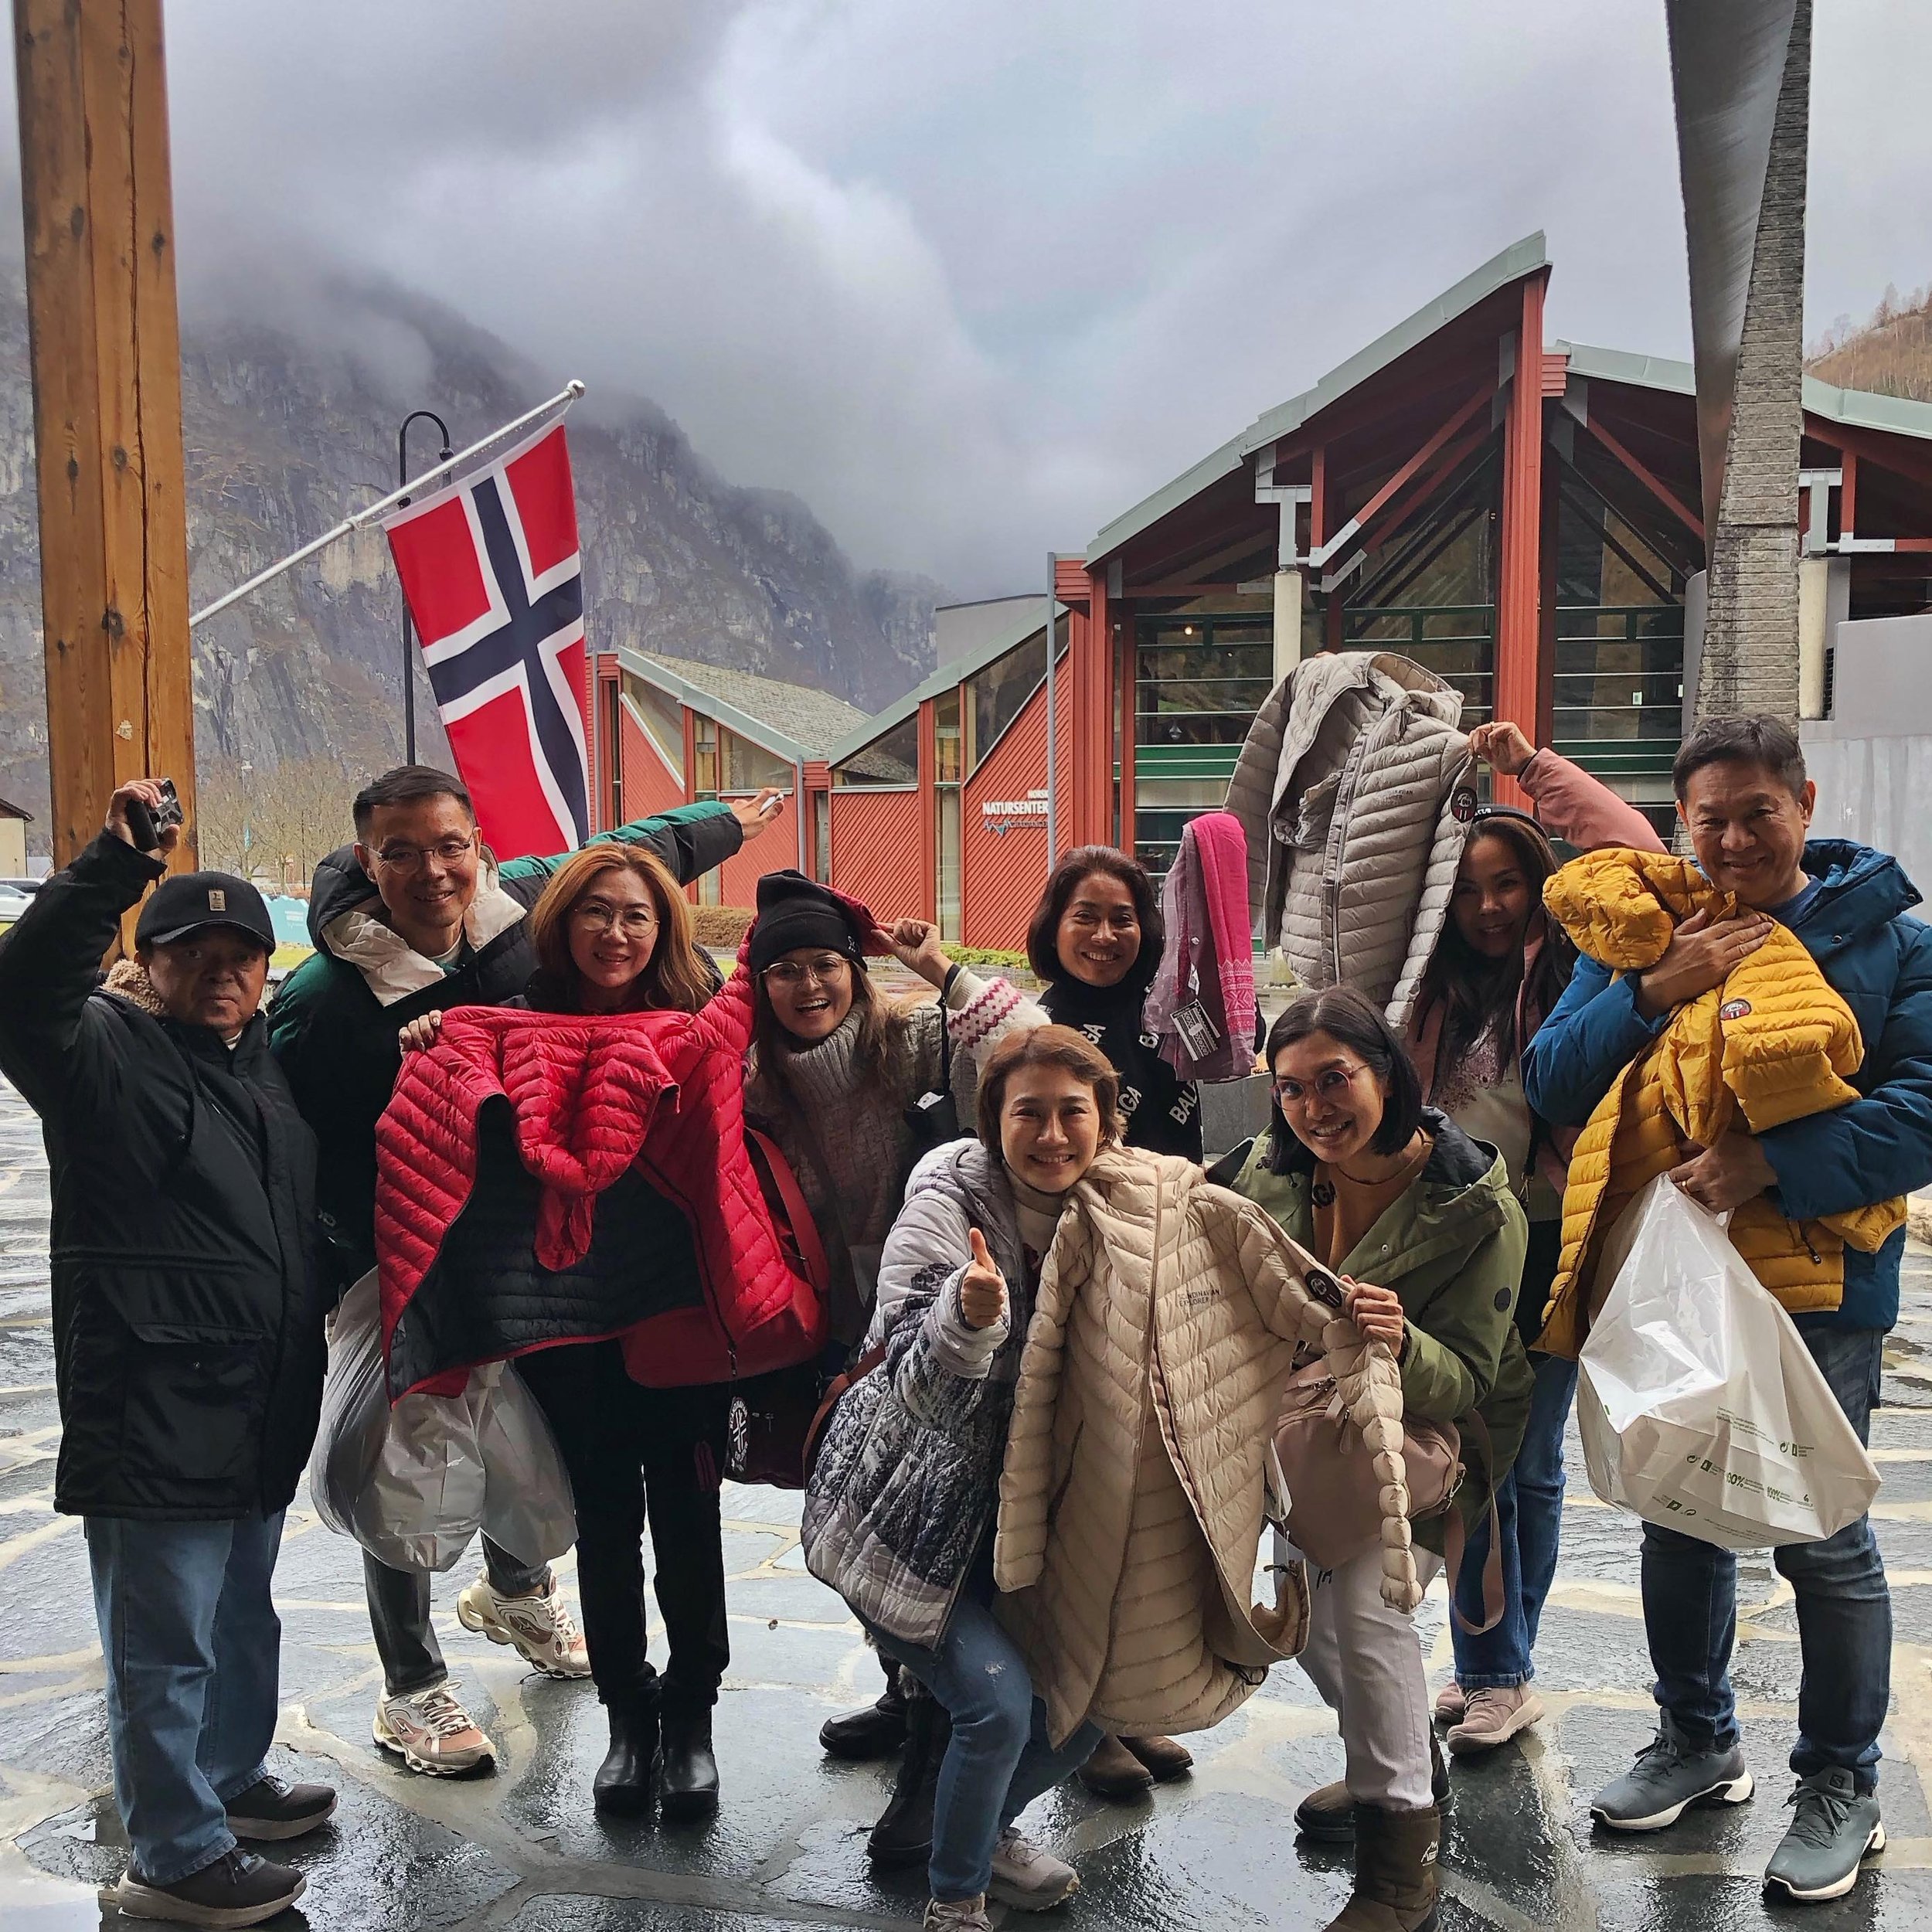 The heroes of our story today !!!! Our happy explorers from Thailand !!!! Thank you for visiting us in the gift shop. It was a pleasure meeting you 🇹🇭 Guests like you are the reason why we love our job at Norsk Natursenter so much &hellip;.. we wil